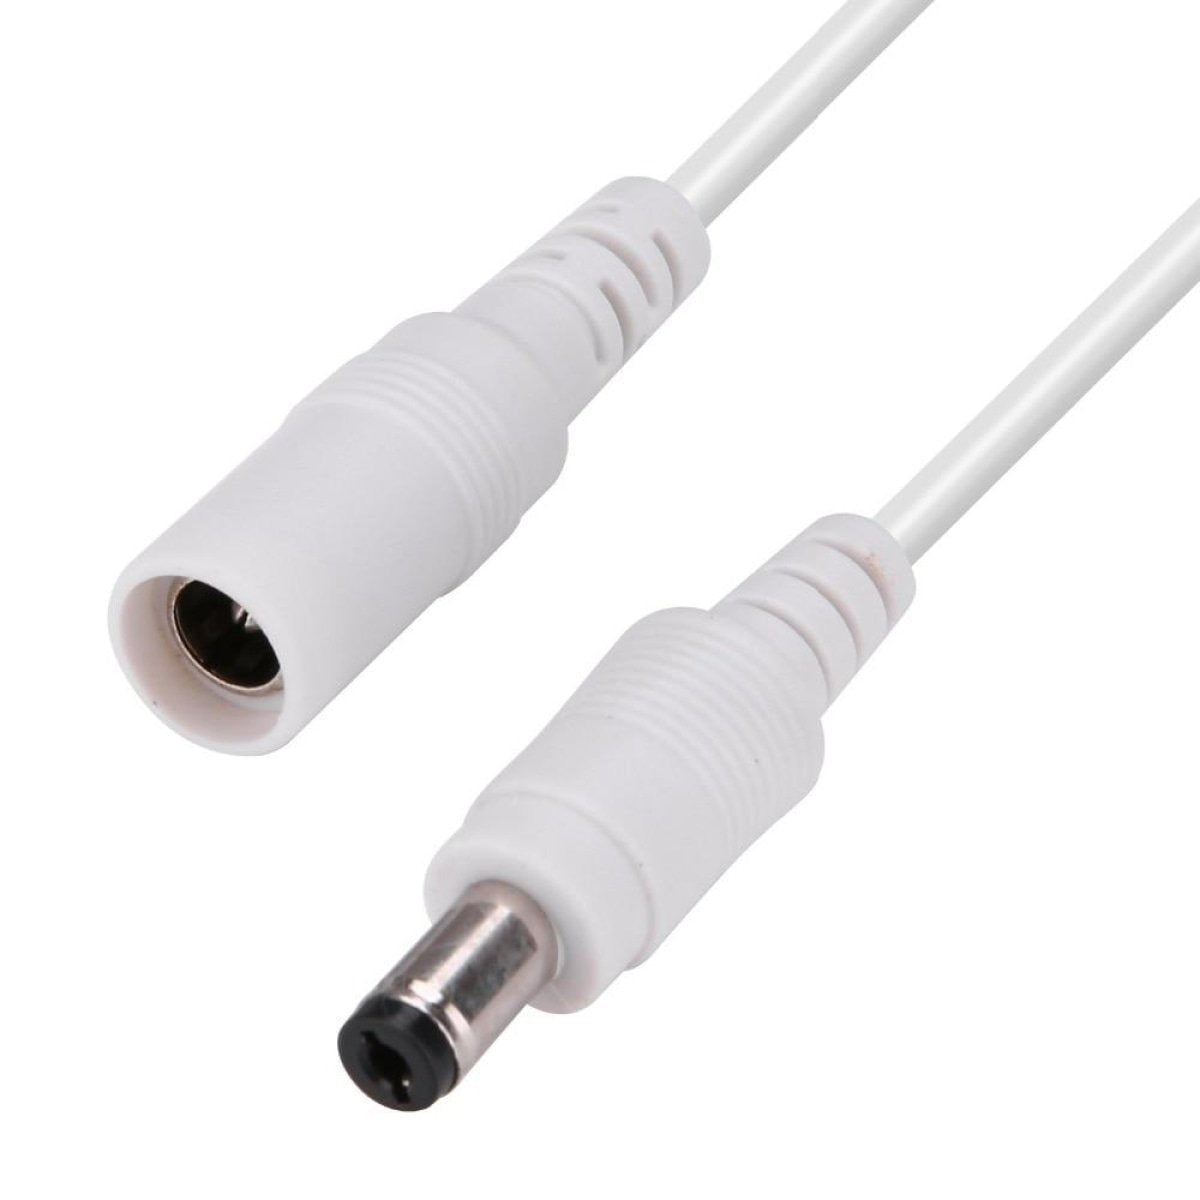 12V 22AWG 3A DC Extension Cable LED CCTV Camera 5.5mm x 2.1mm Power Cord - 0.5m White - - Asia Sell